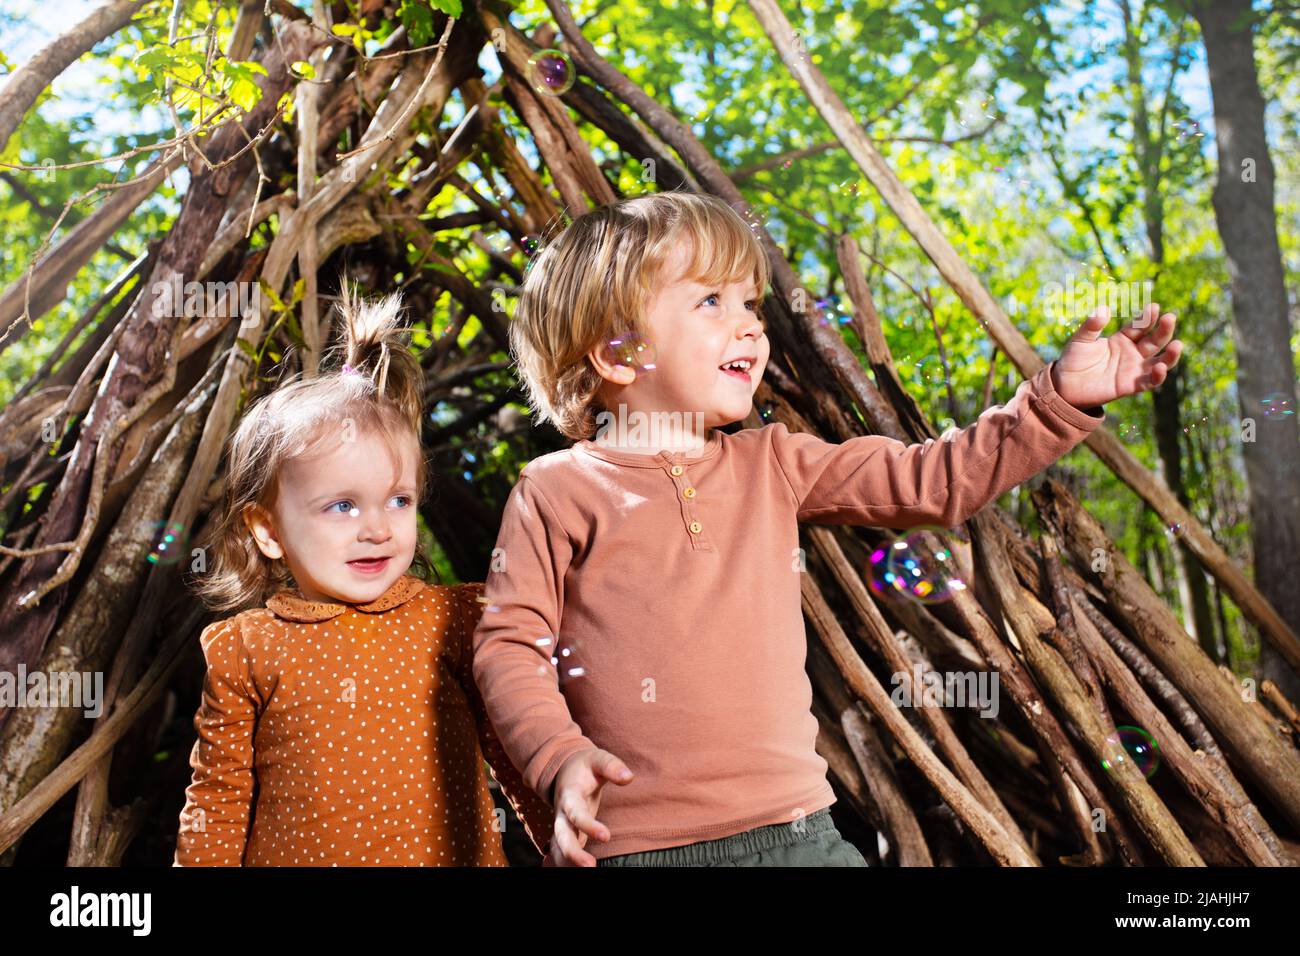 Two children boy, girl play with soap bubbles in hut of branches Stock Photo